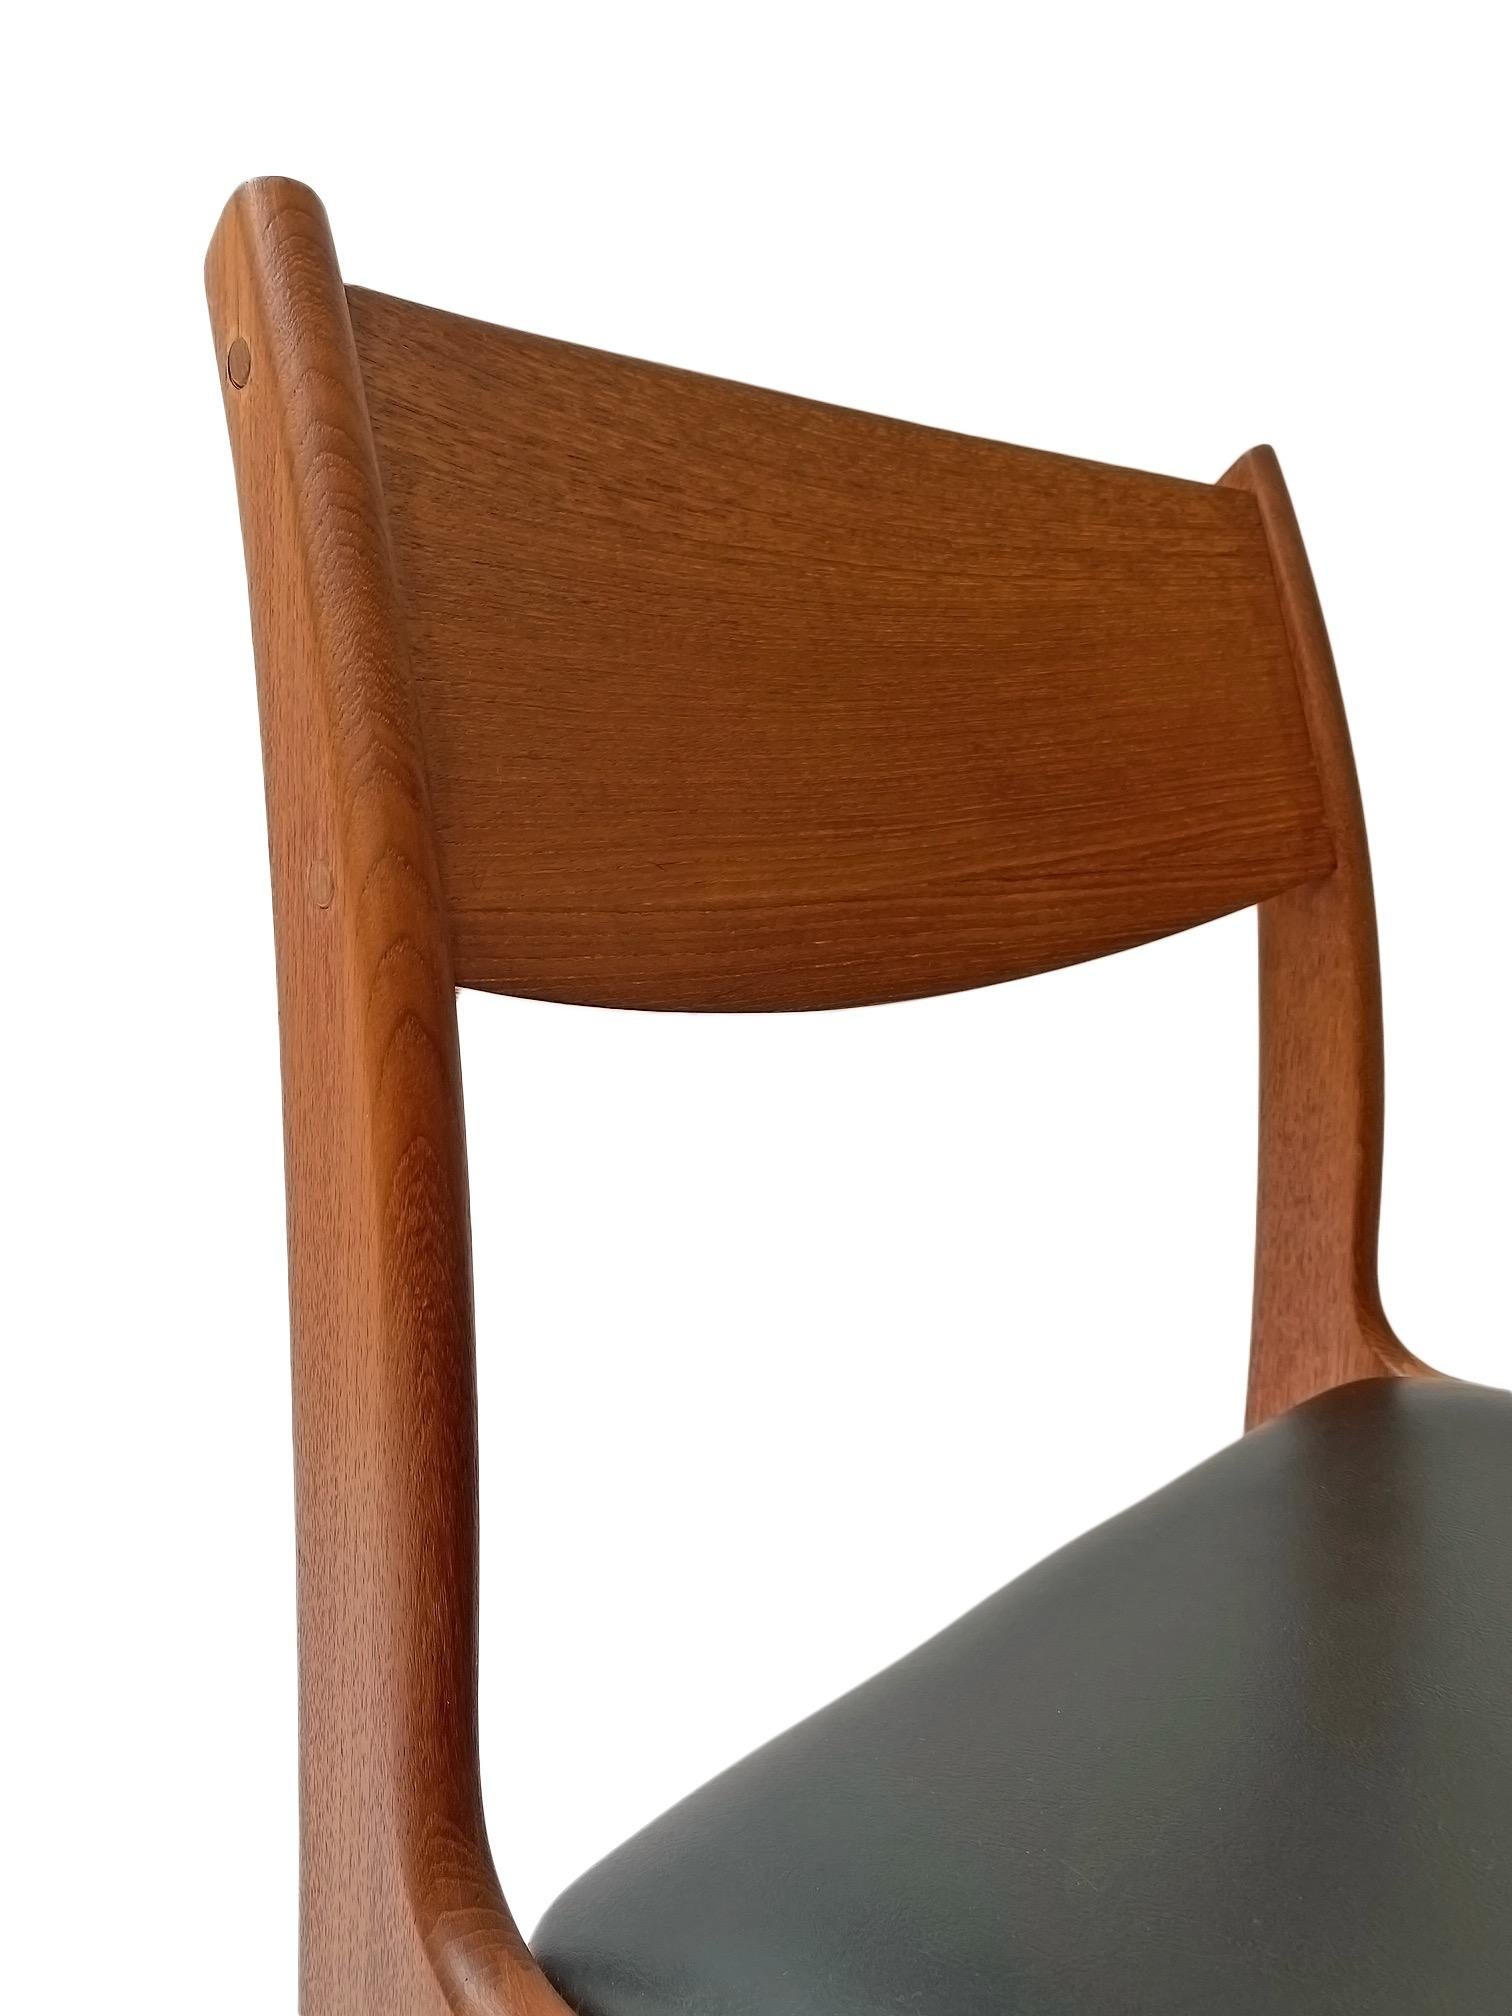 Danish Set of 4 Teak and Black Vinyl Dining Chairs, Mid Century 1960s For Sale 1